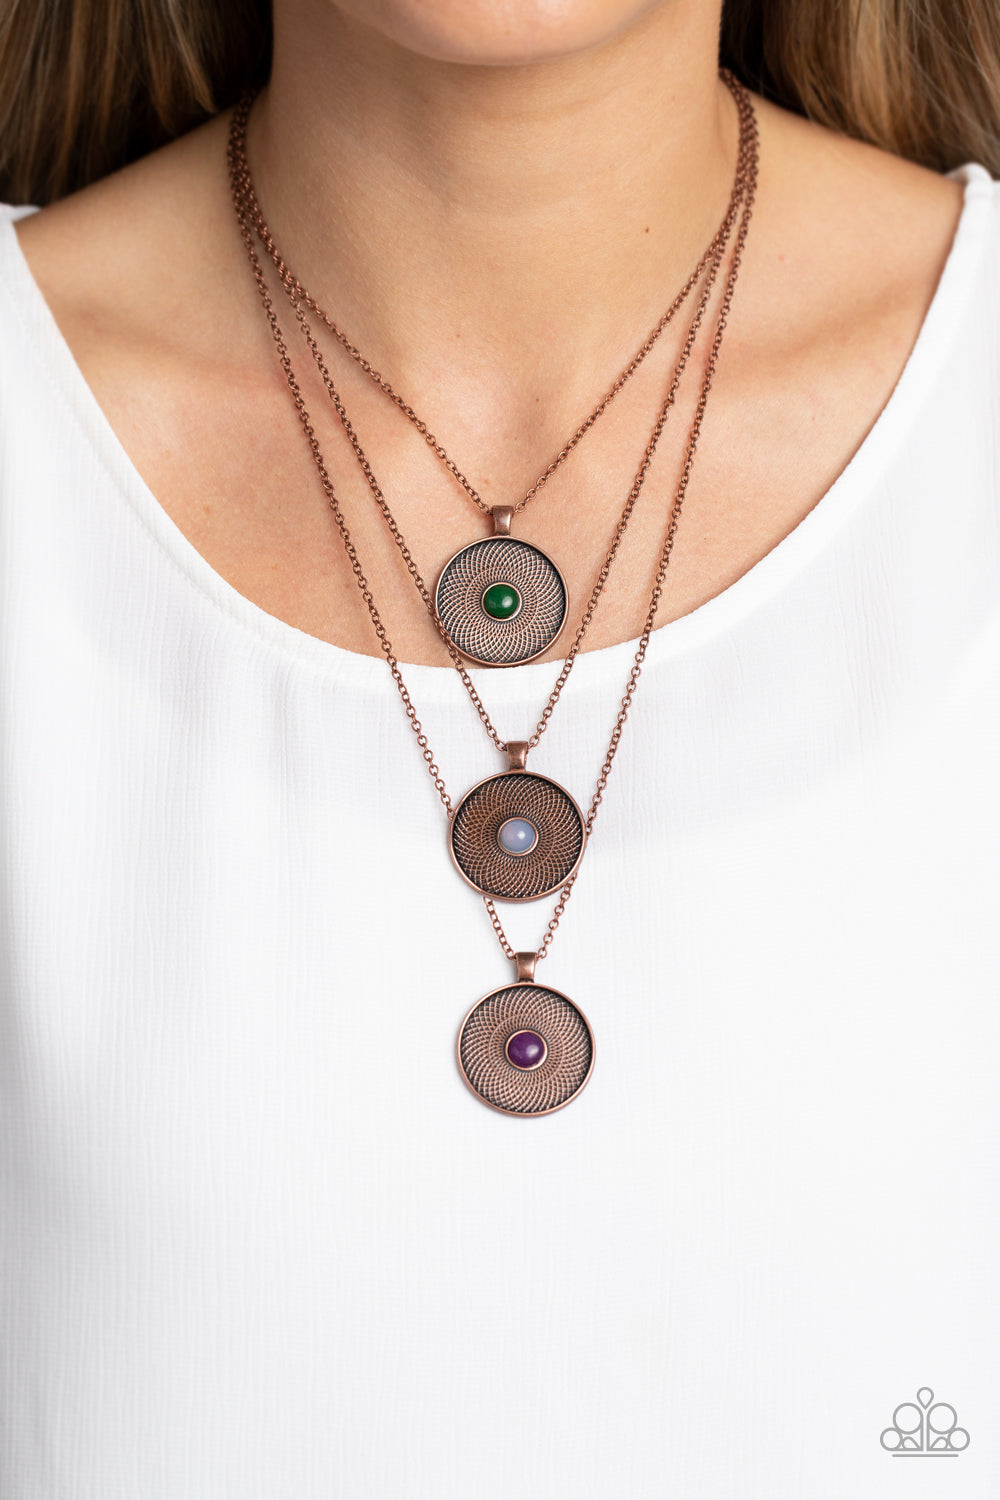 Geographic Grace - Copper Necklace - Paparazzi Accessories - Stamped with a floral motif, oversized copper pendants trickle from three layered chains below the neckline for a casual style. Featured in the center of each disc, a jade, opal white, and amethyst stone create a pop of color against the textured backdrop. Features an adjustable clasp closure. As the stone elements in this piece are natural, some color variation is normal.

Sold as one individual necklace.